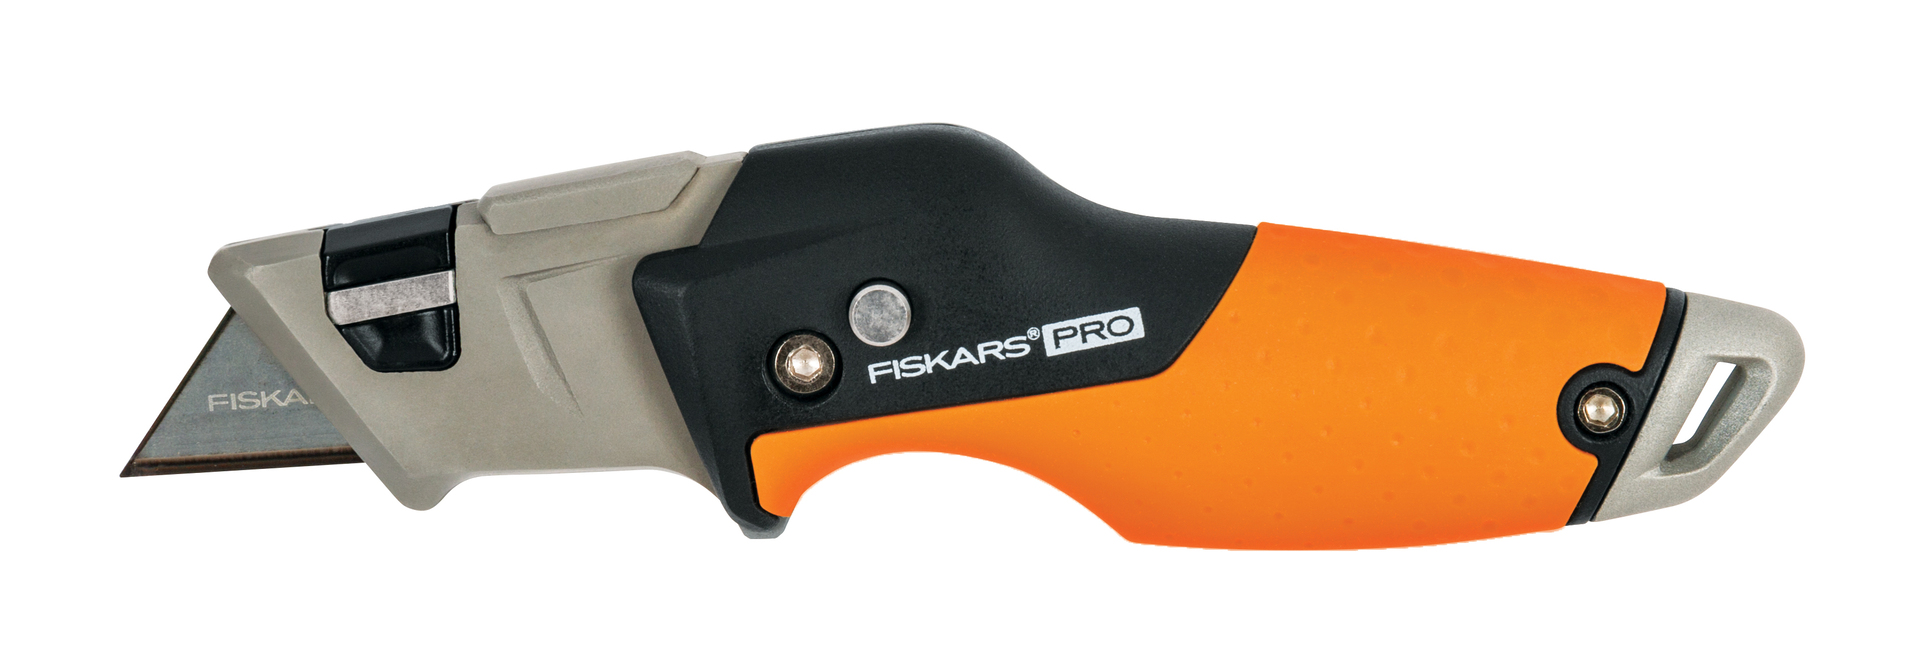 CarbonMax folding utility knife HB